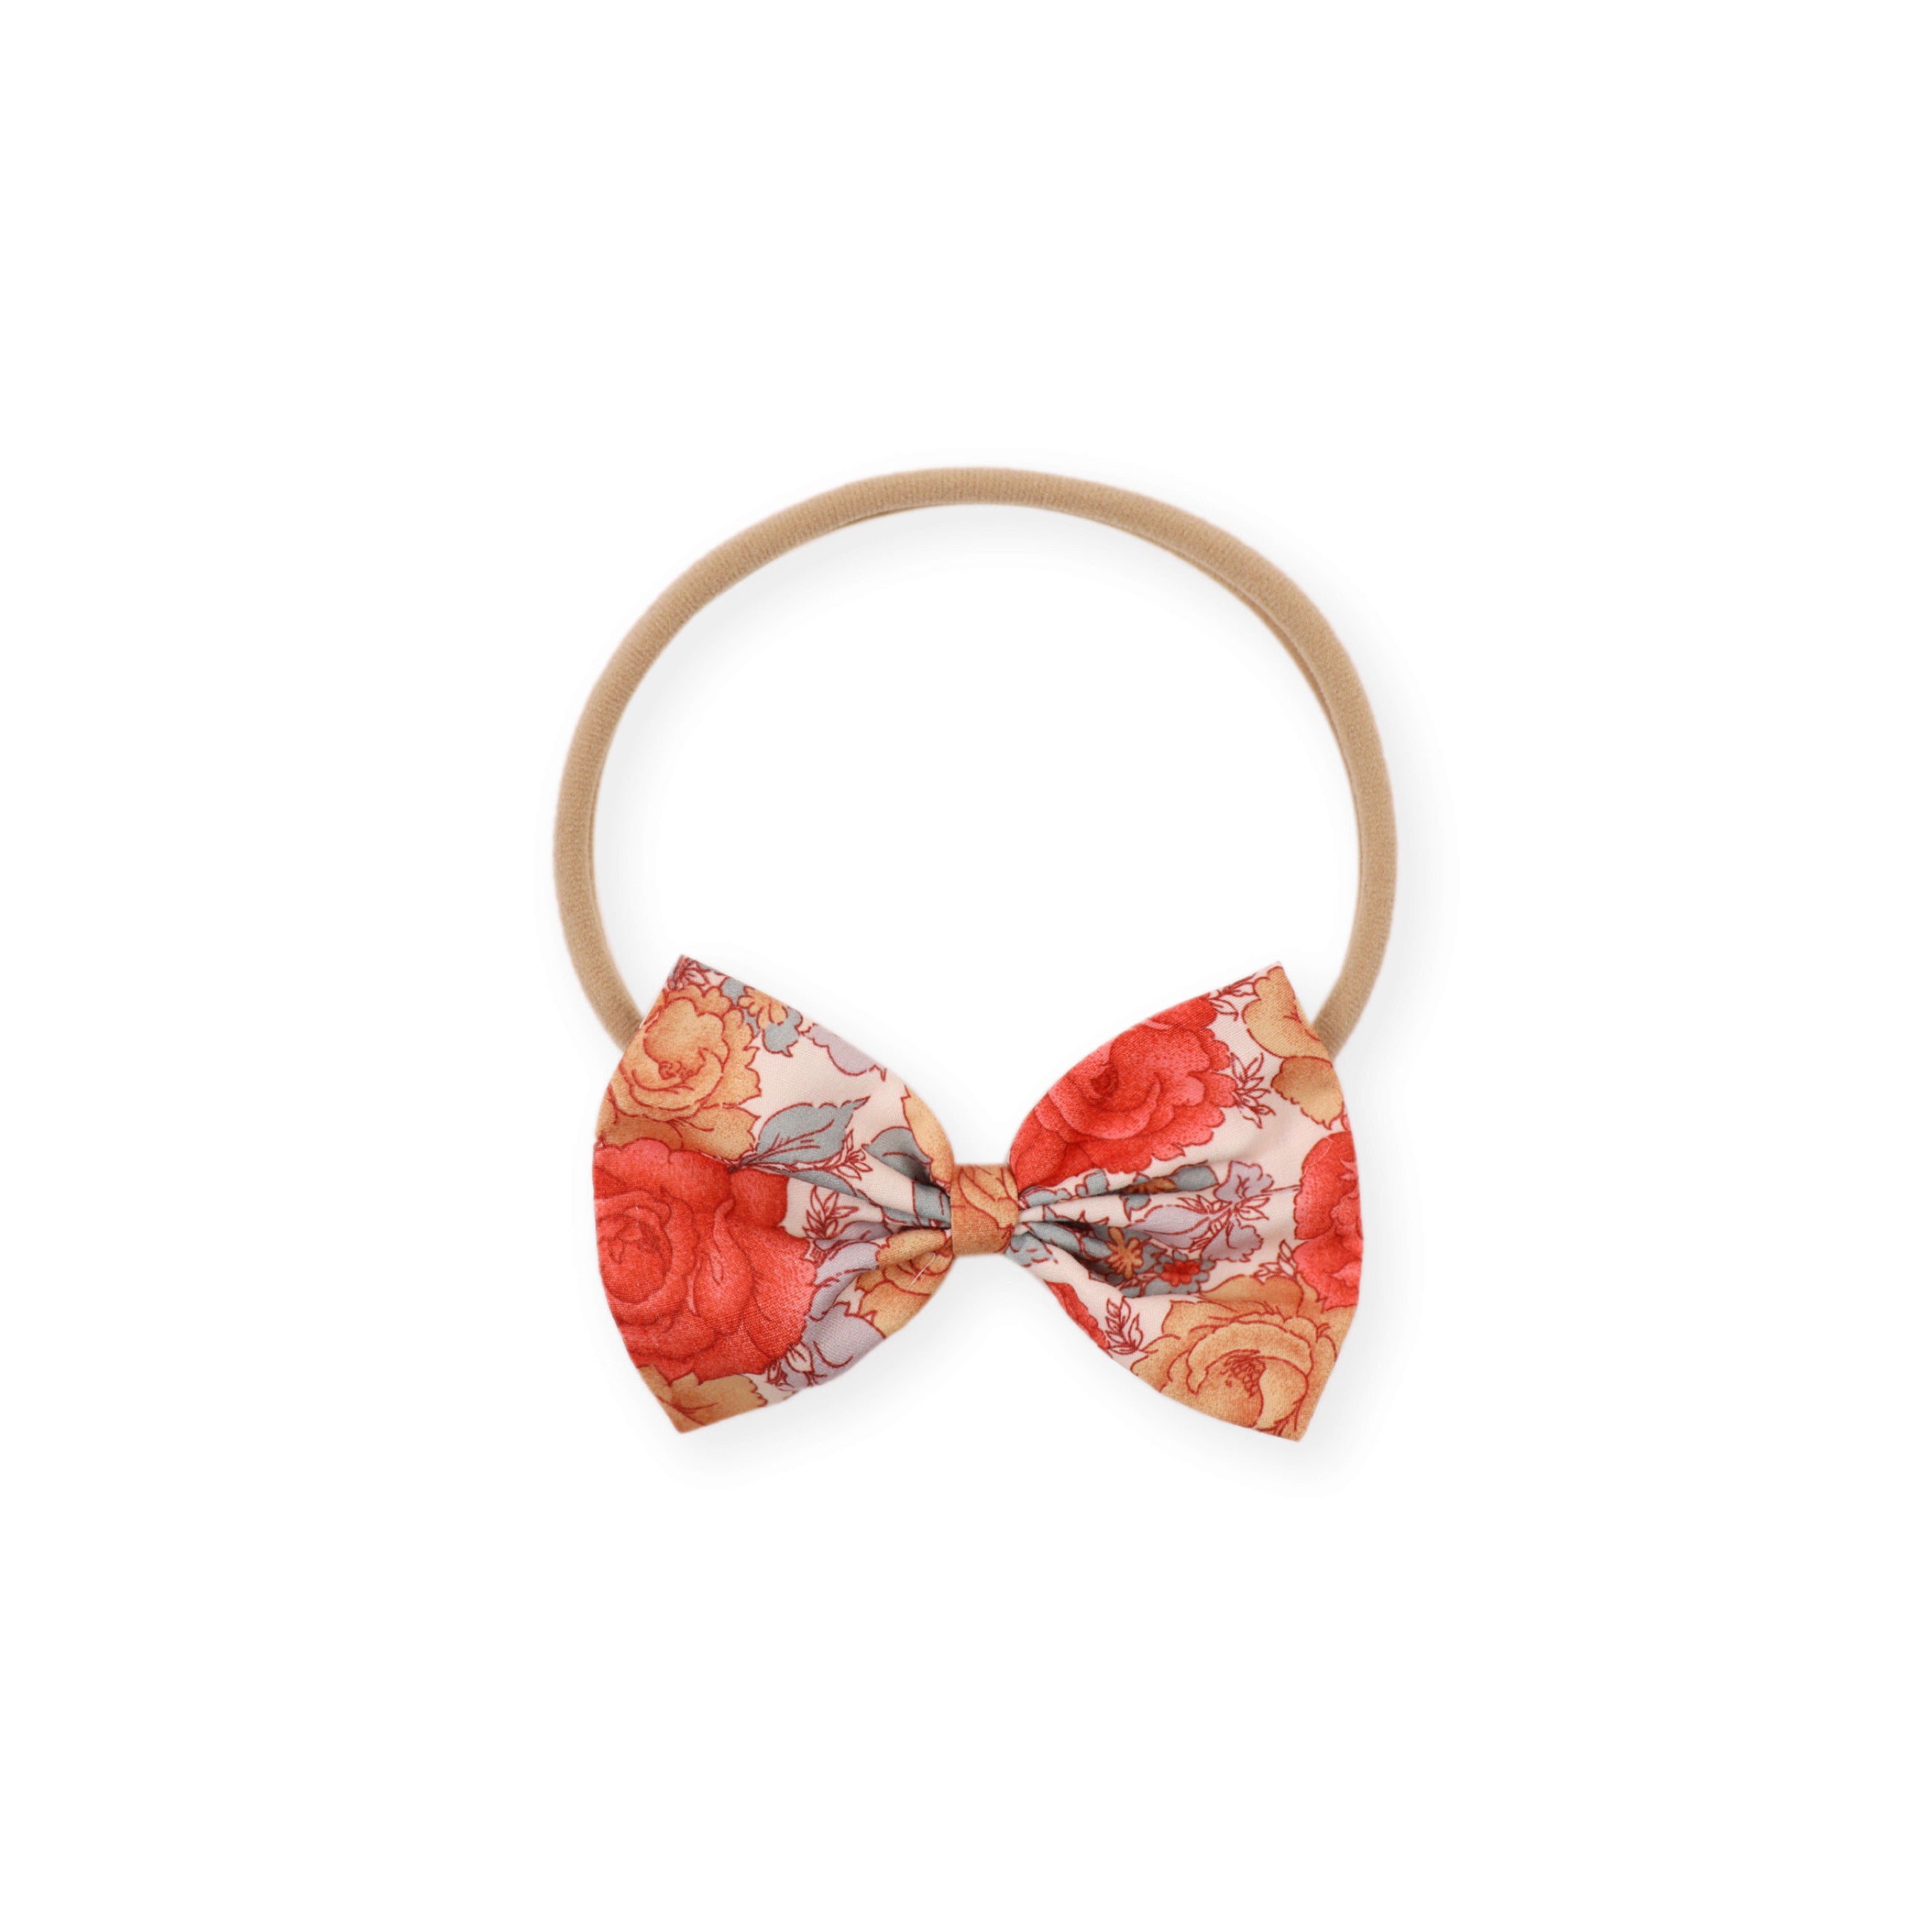 Sophia buttoned hair accessories